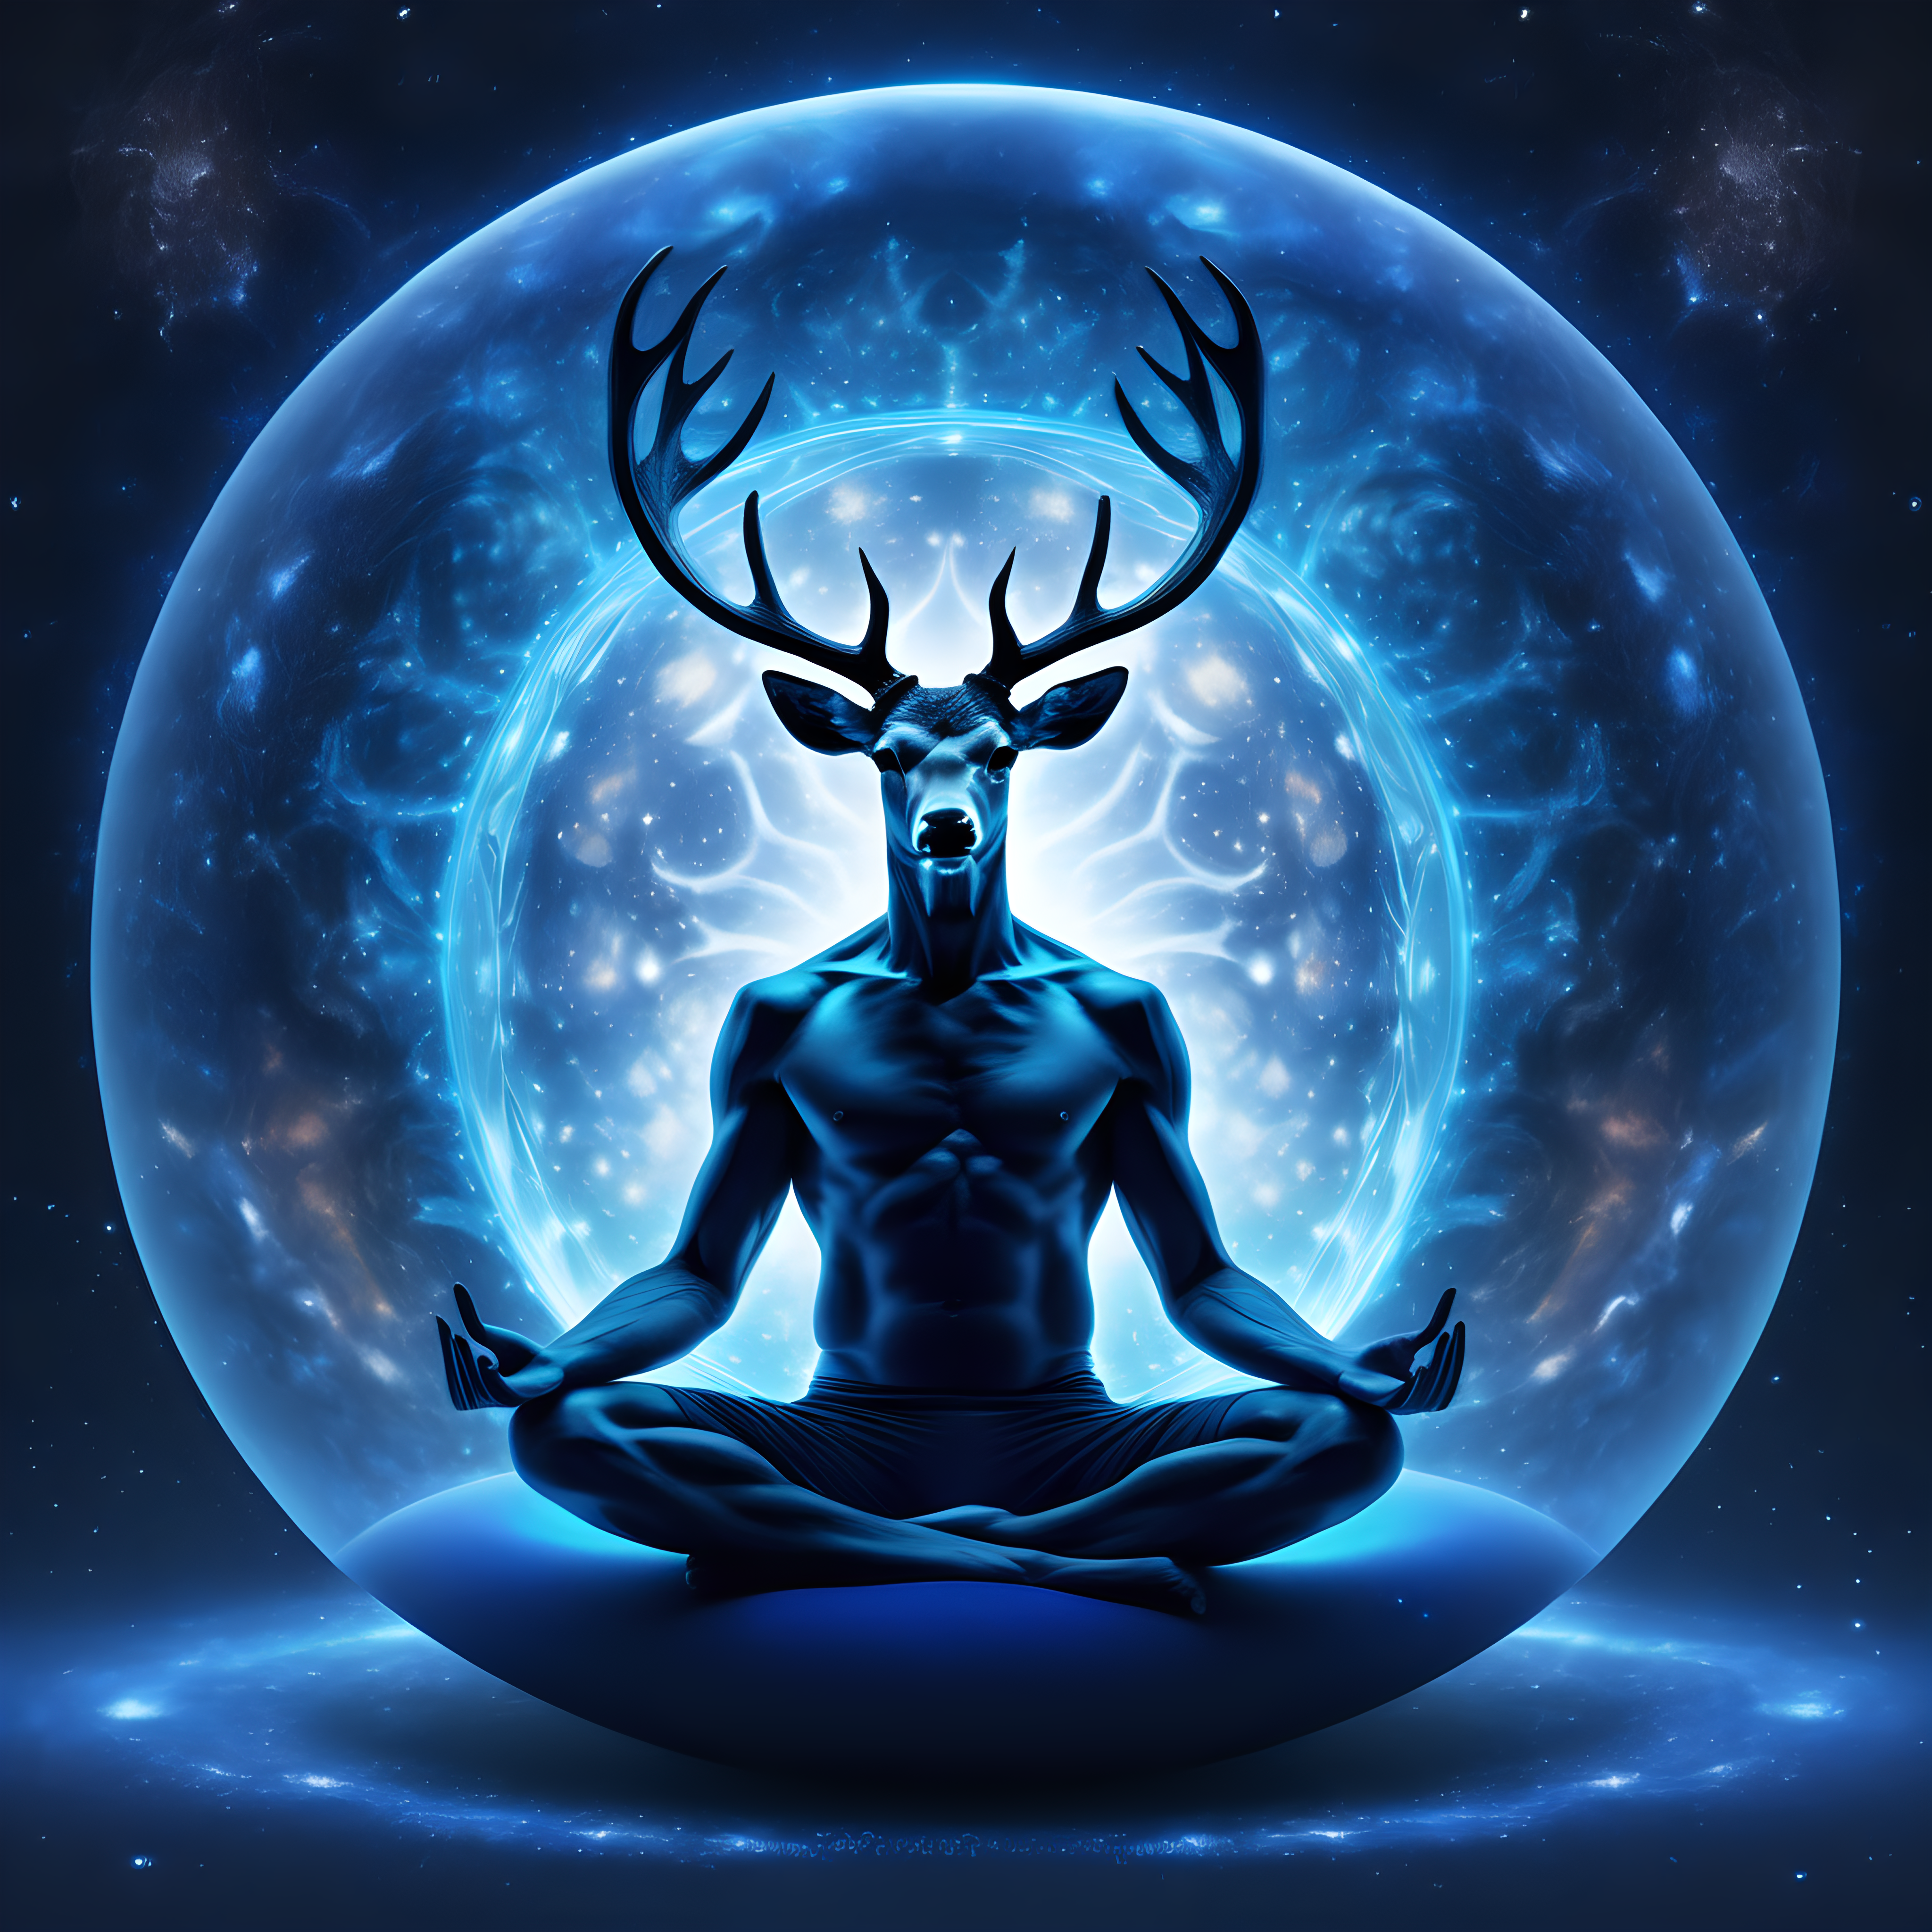 Human body with a deer head and antlers. He should be in a cross legged yoga position, sitting inside of a large blue shimmering shpere. The background setting should be the universe and stardust